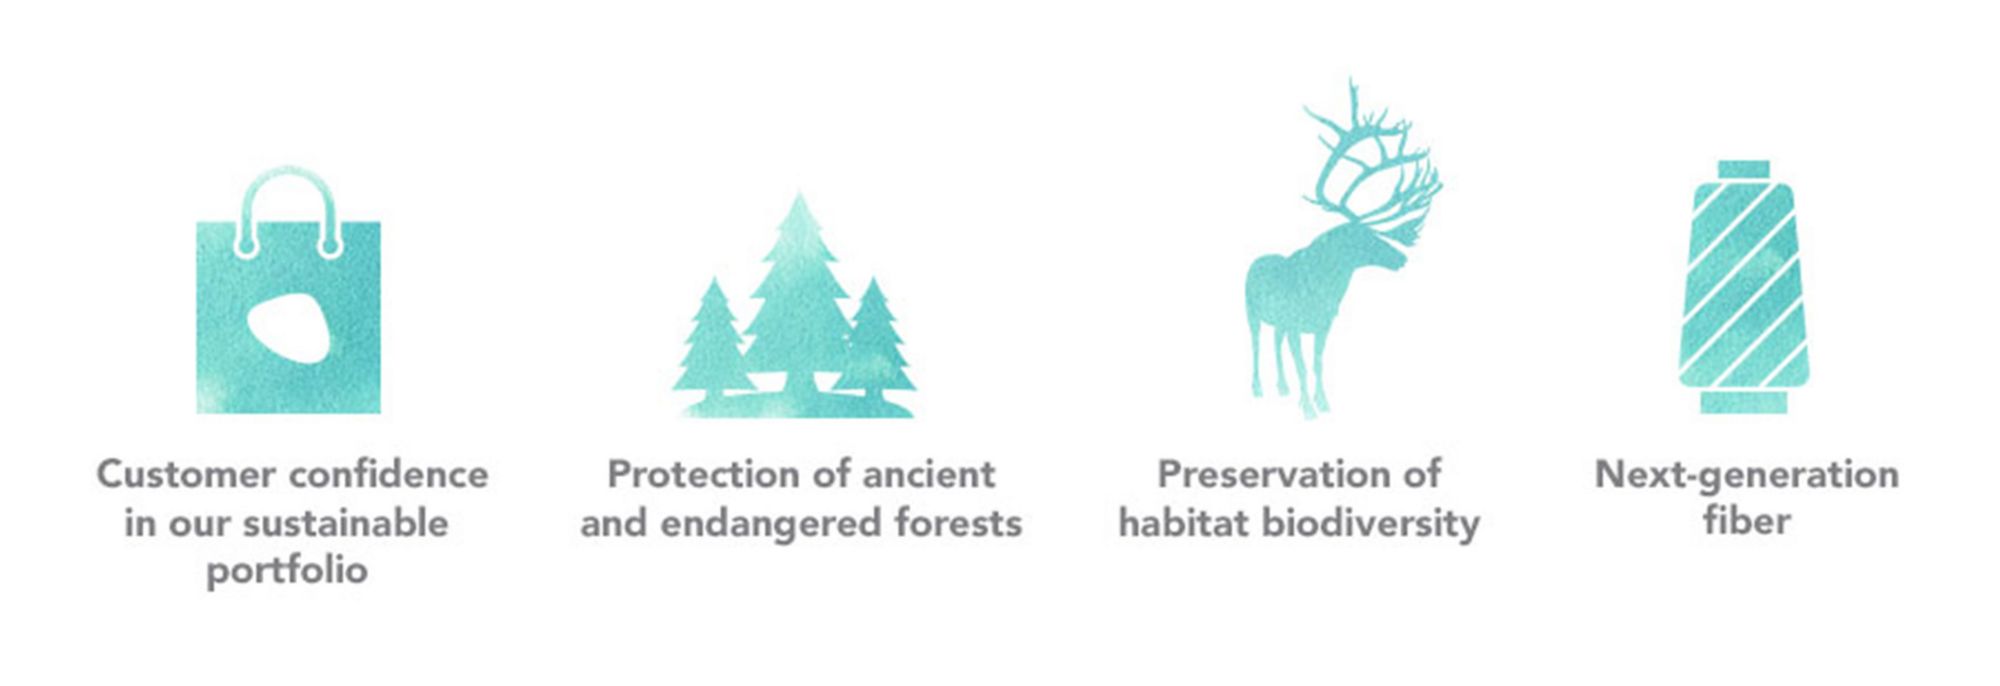 Infographic of 4 sustainable forestry practices 